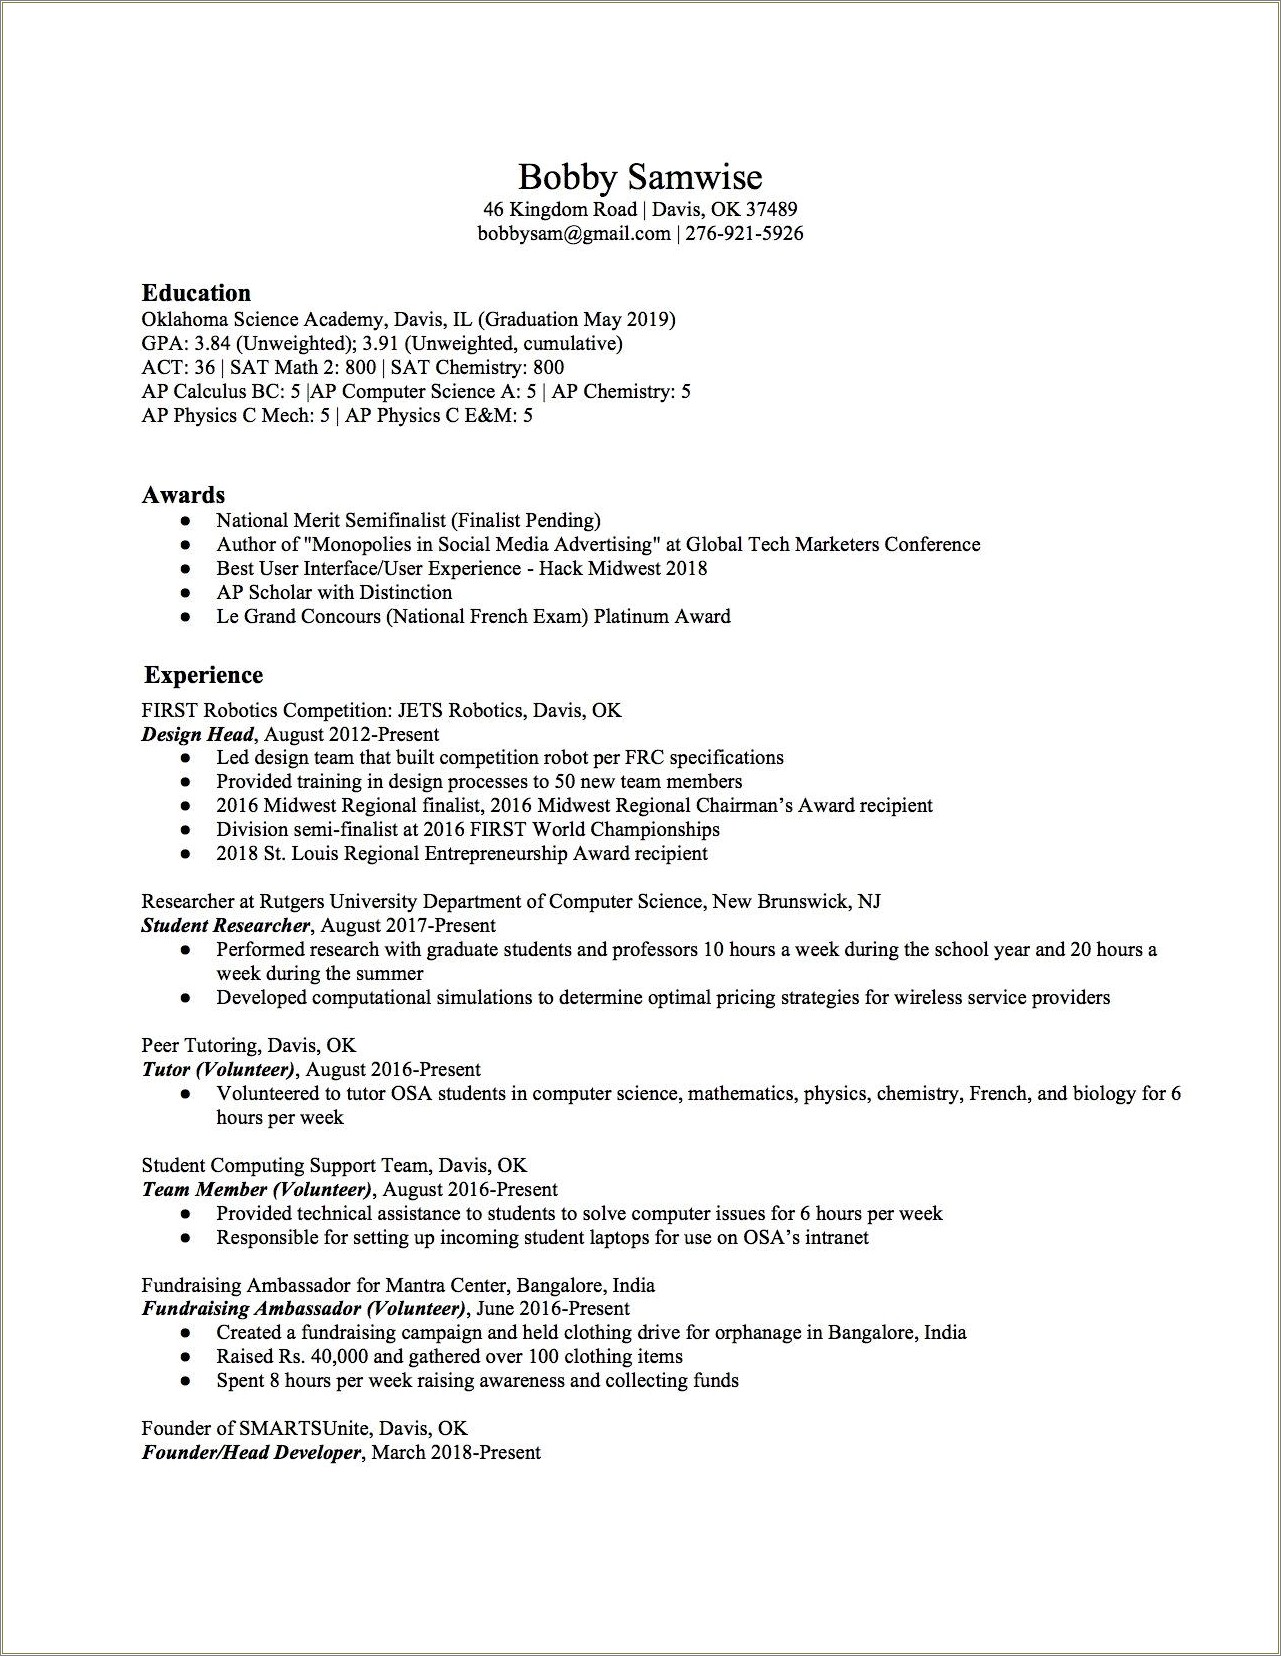 Resume Awards And Achievements Sample